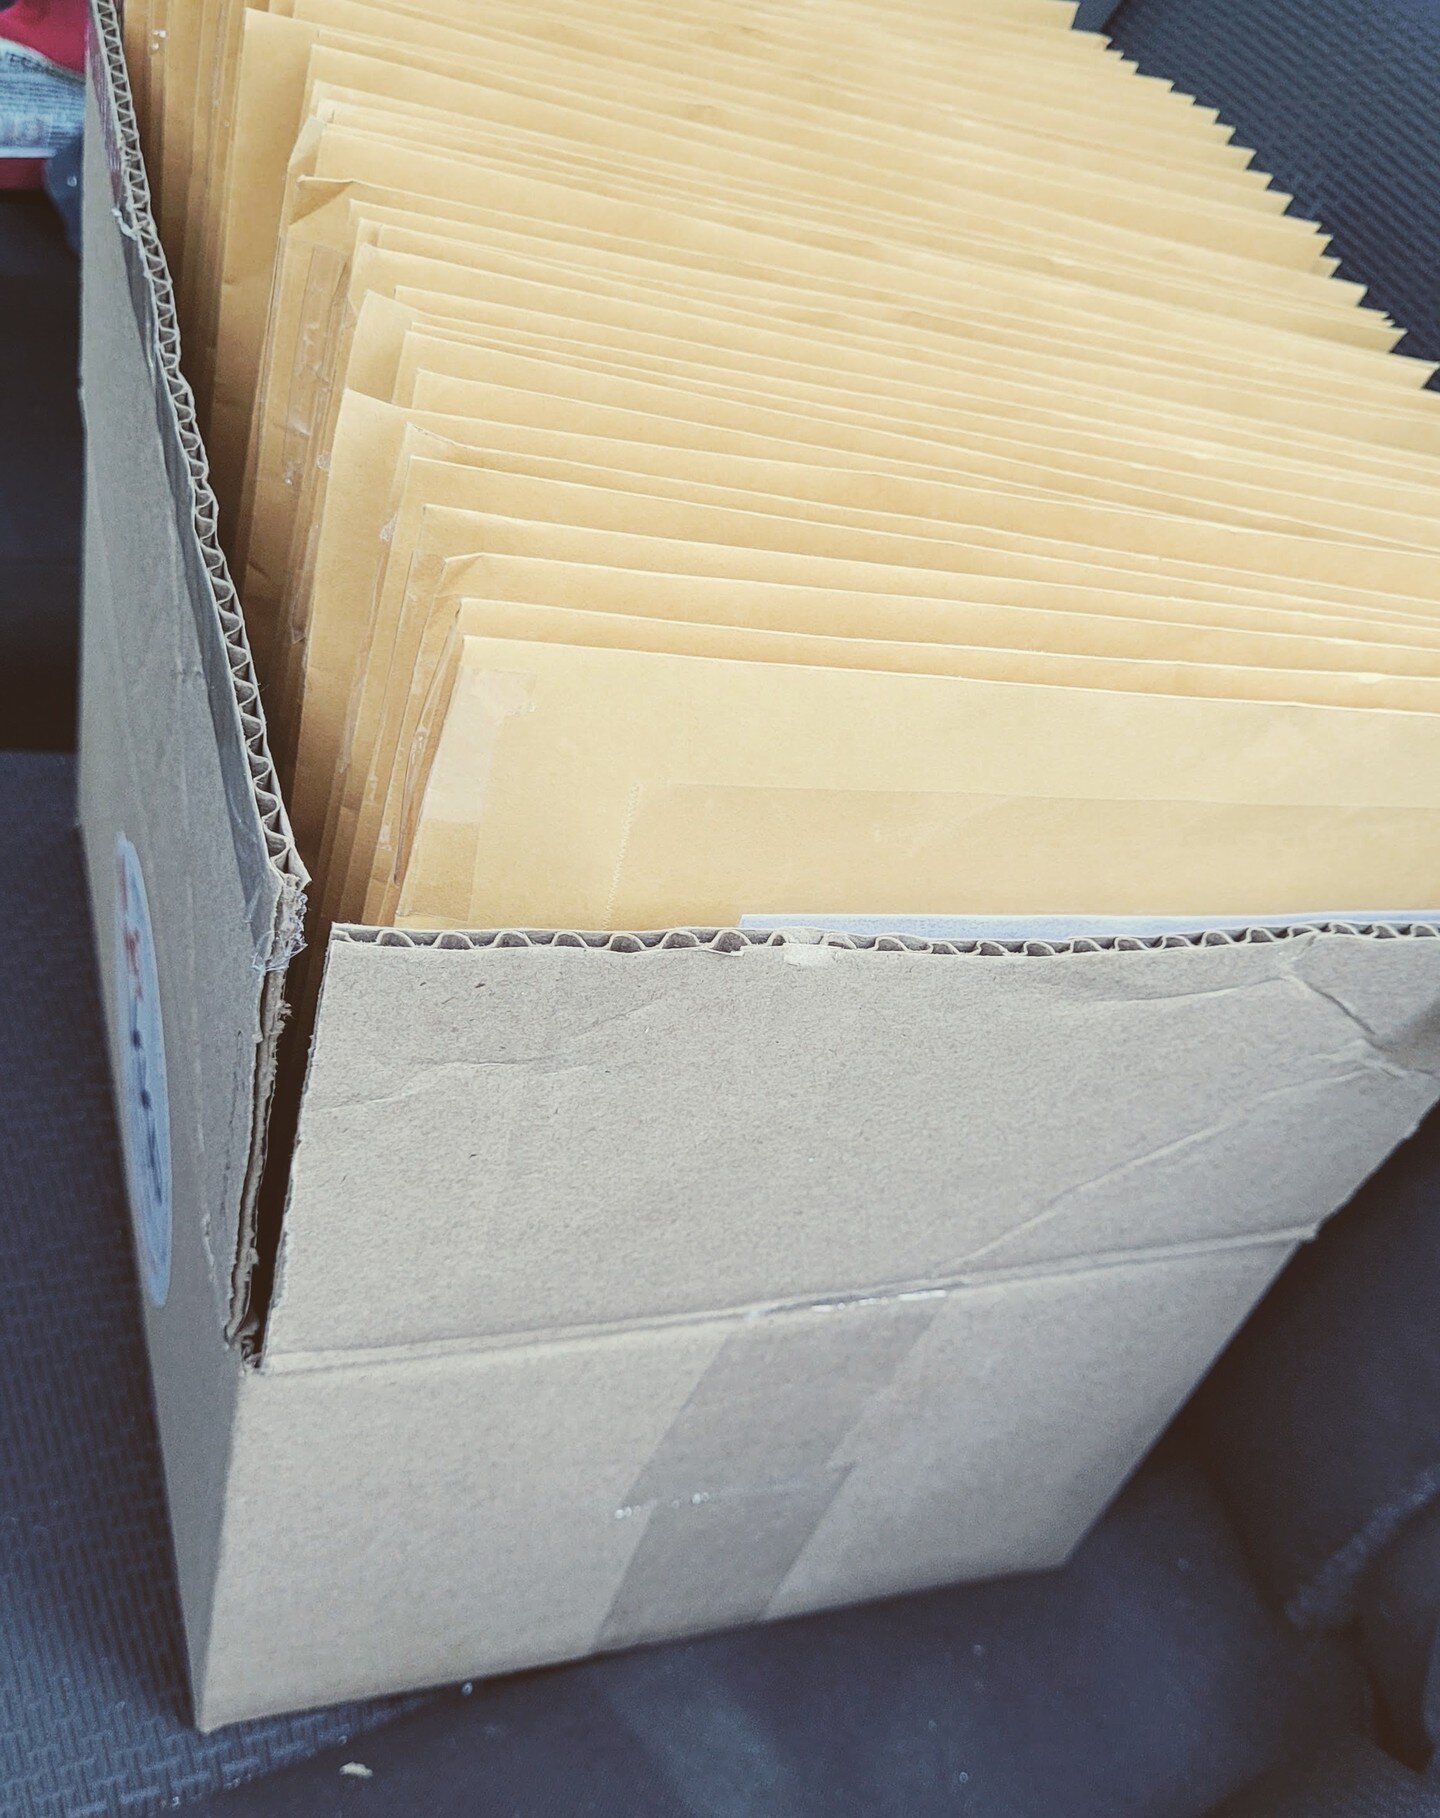 Shipments for our latest #kickstarter project are now fulfilled! #decisions #kickstartercampaign #shipping